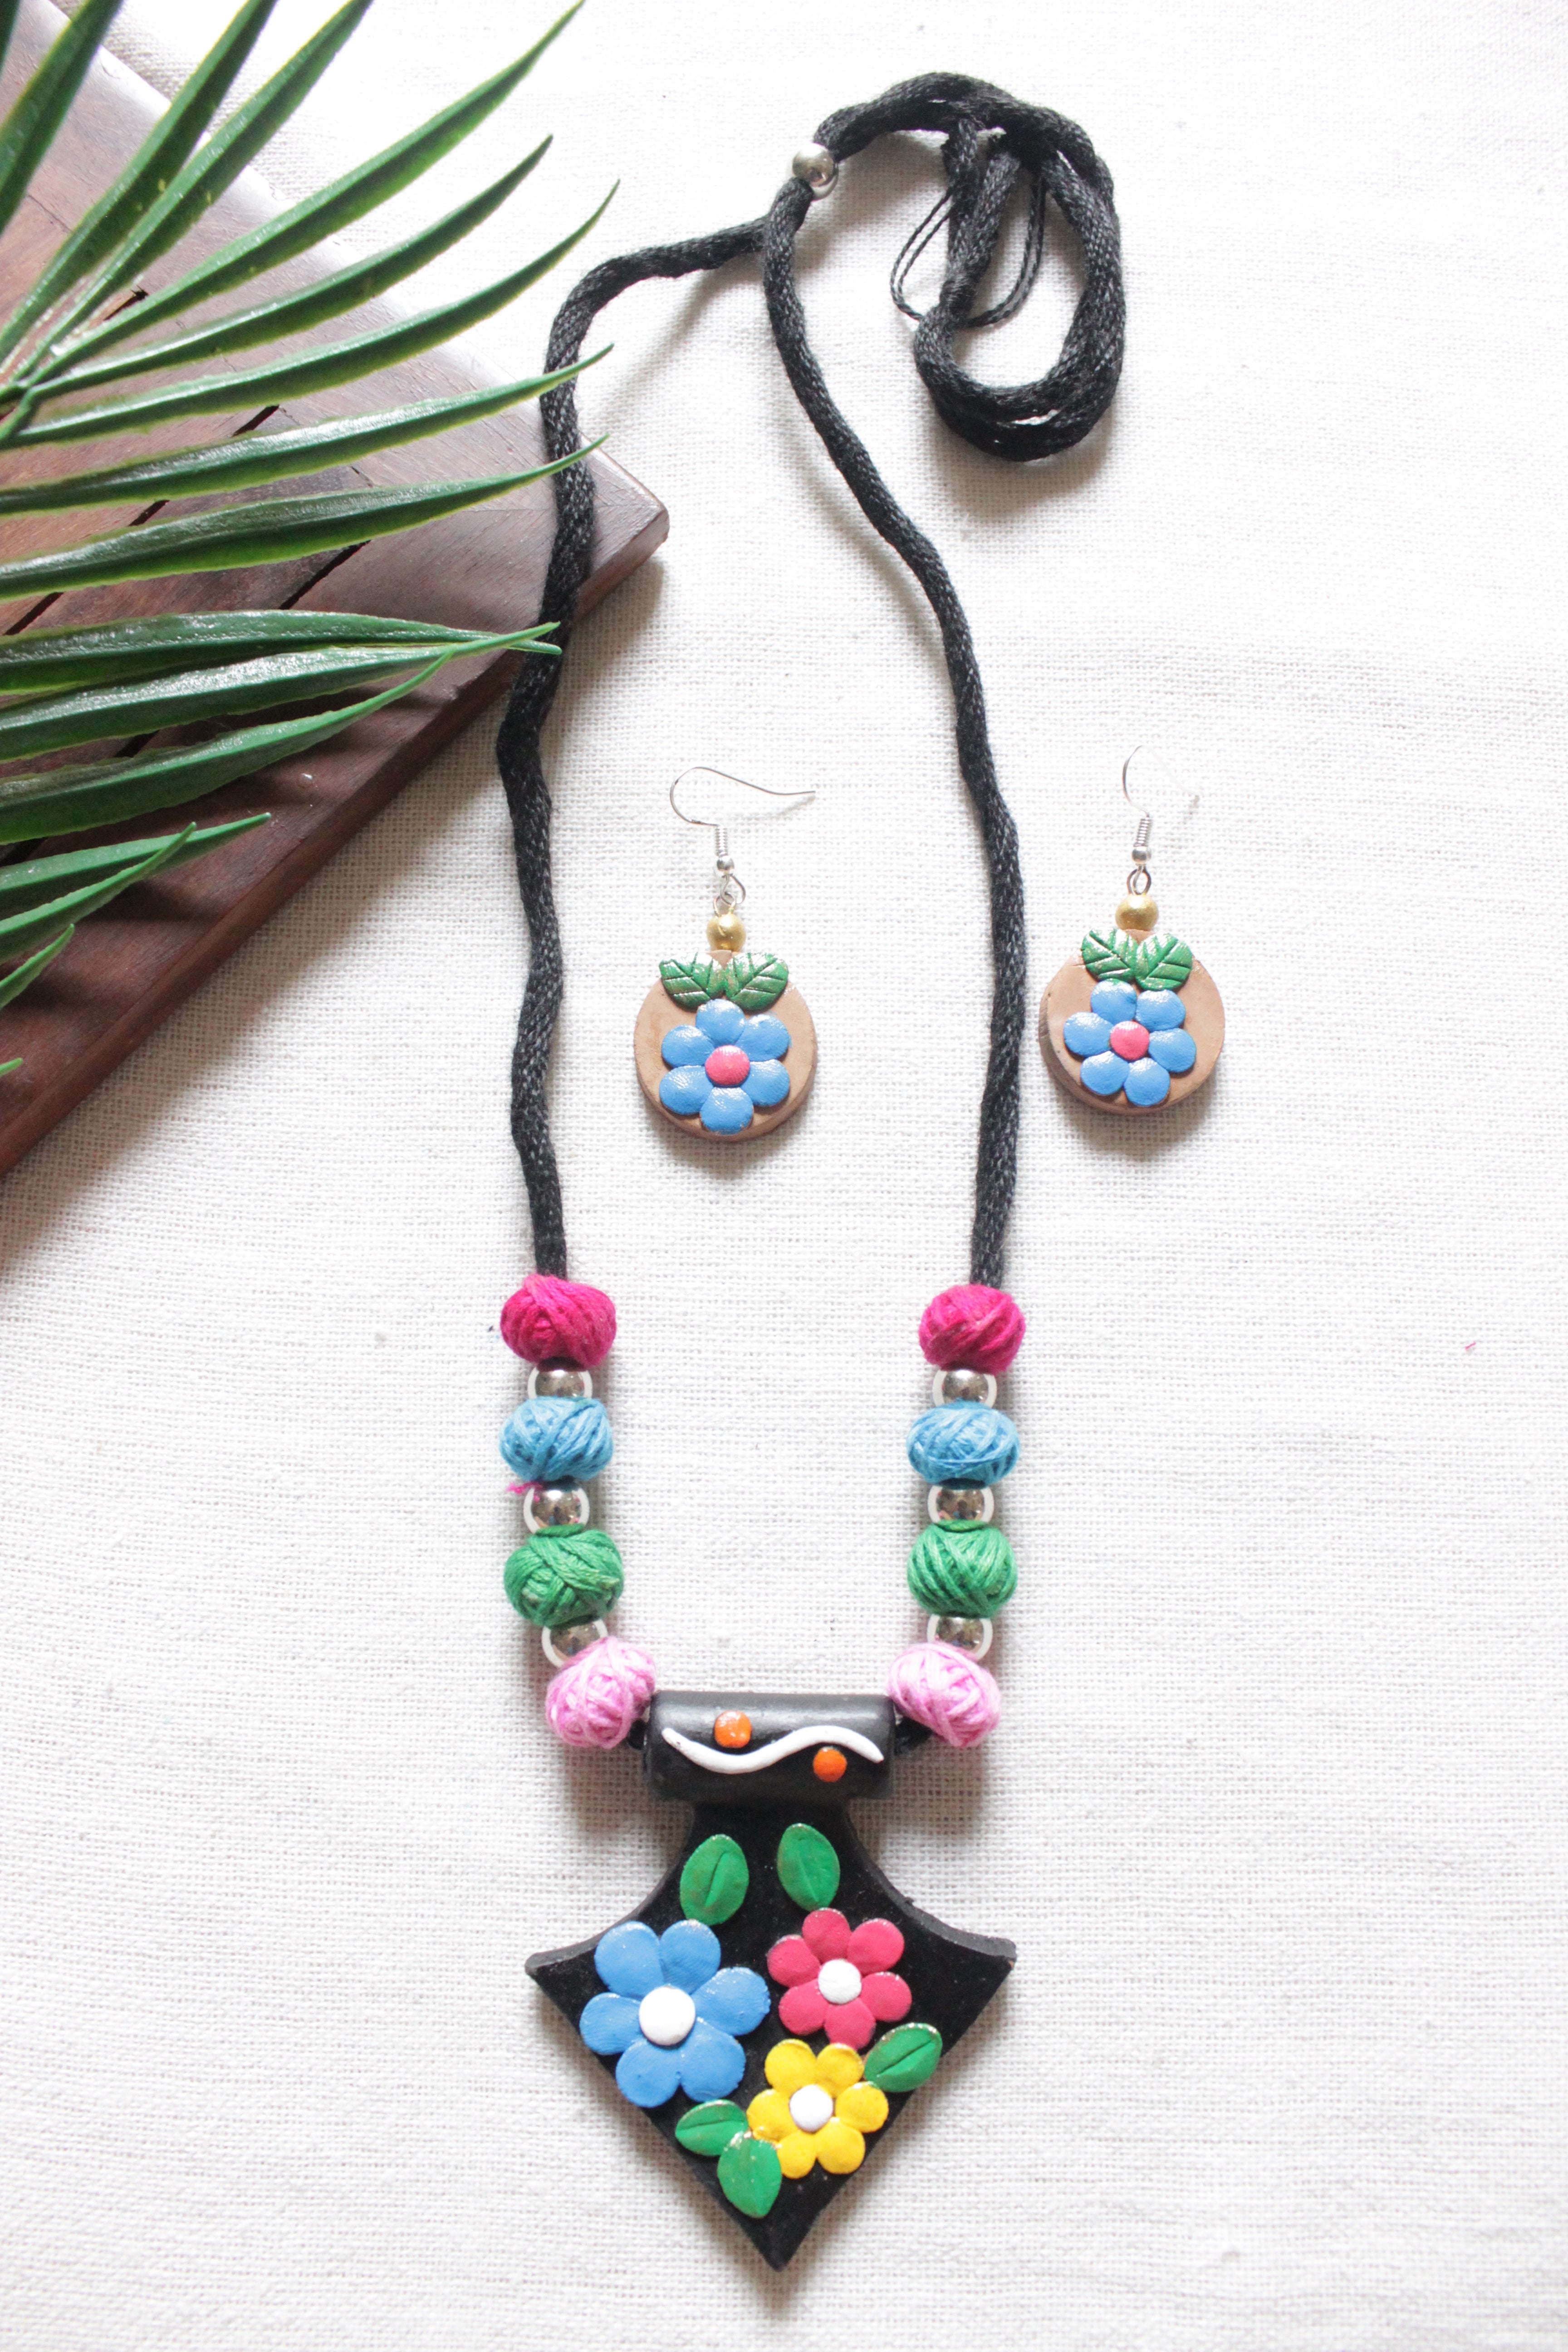 Handcrafted Terracotta Clay & Fabric Beads Adjustable Length Necklace Set